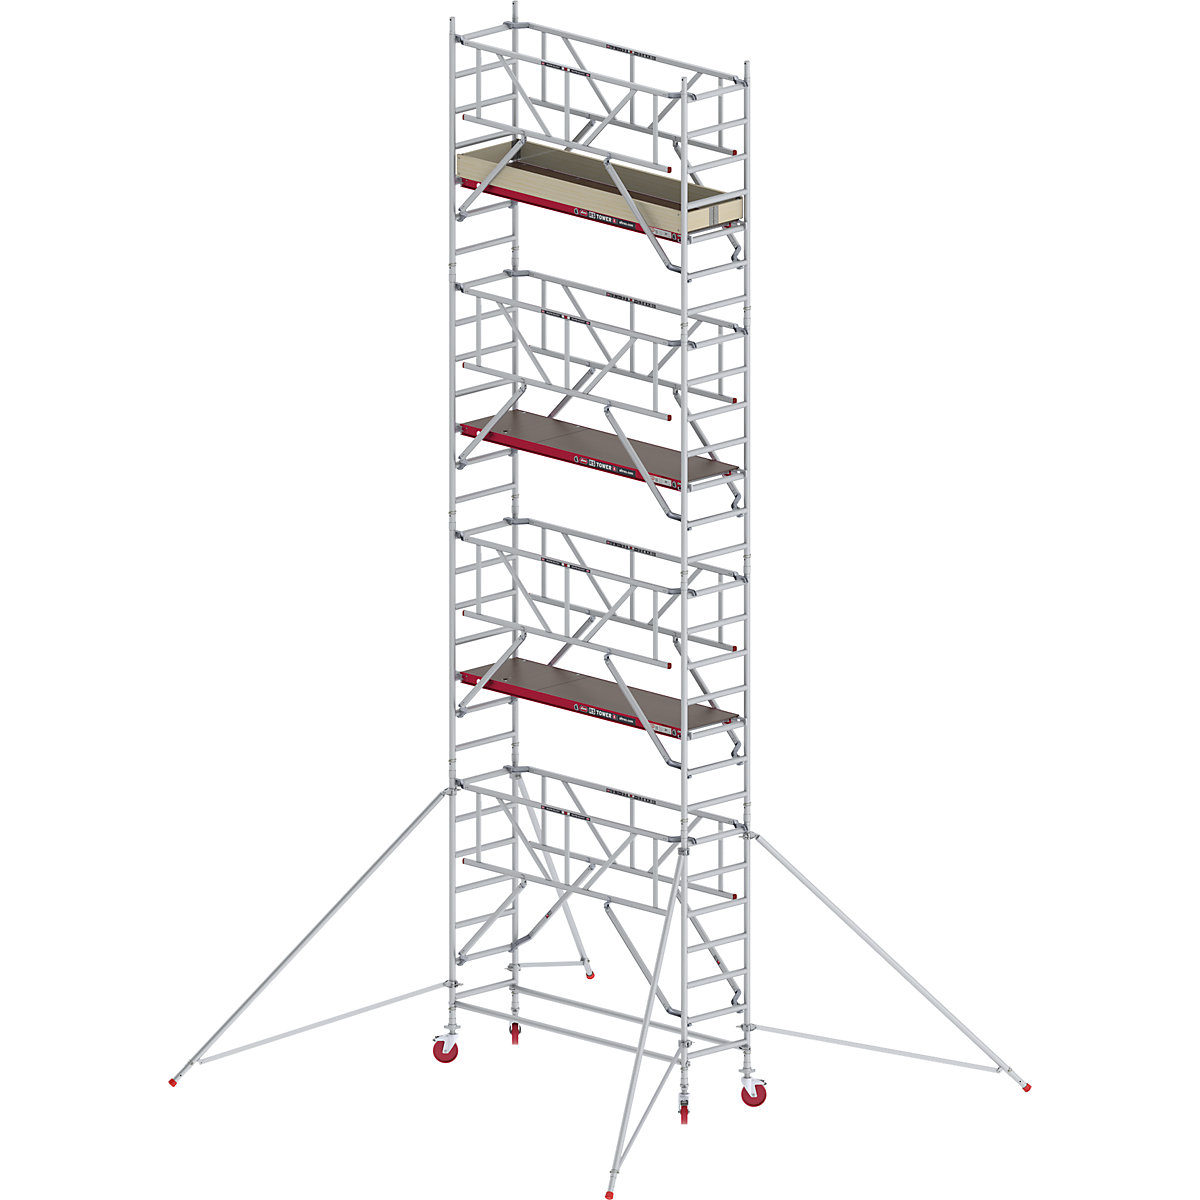 RS TOWER 41 slim mobile access tower with Safe-Quick® – Altrex, wooden platform, length 1.85 m, working height 9.20 m-6